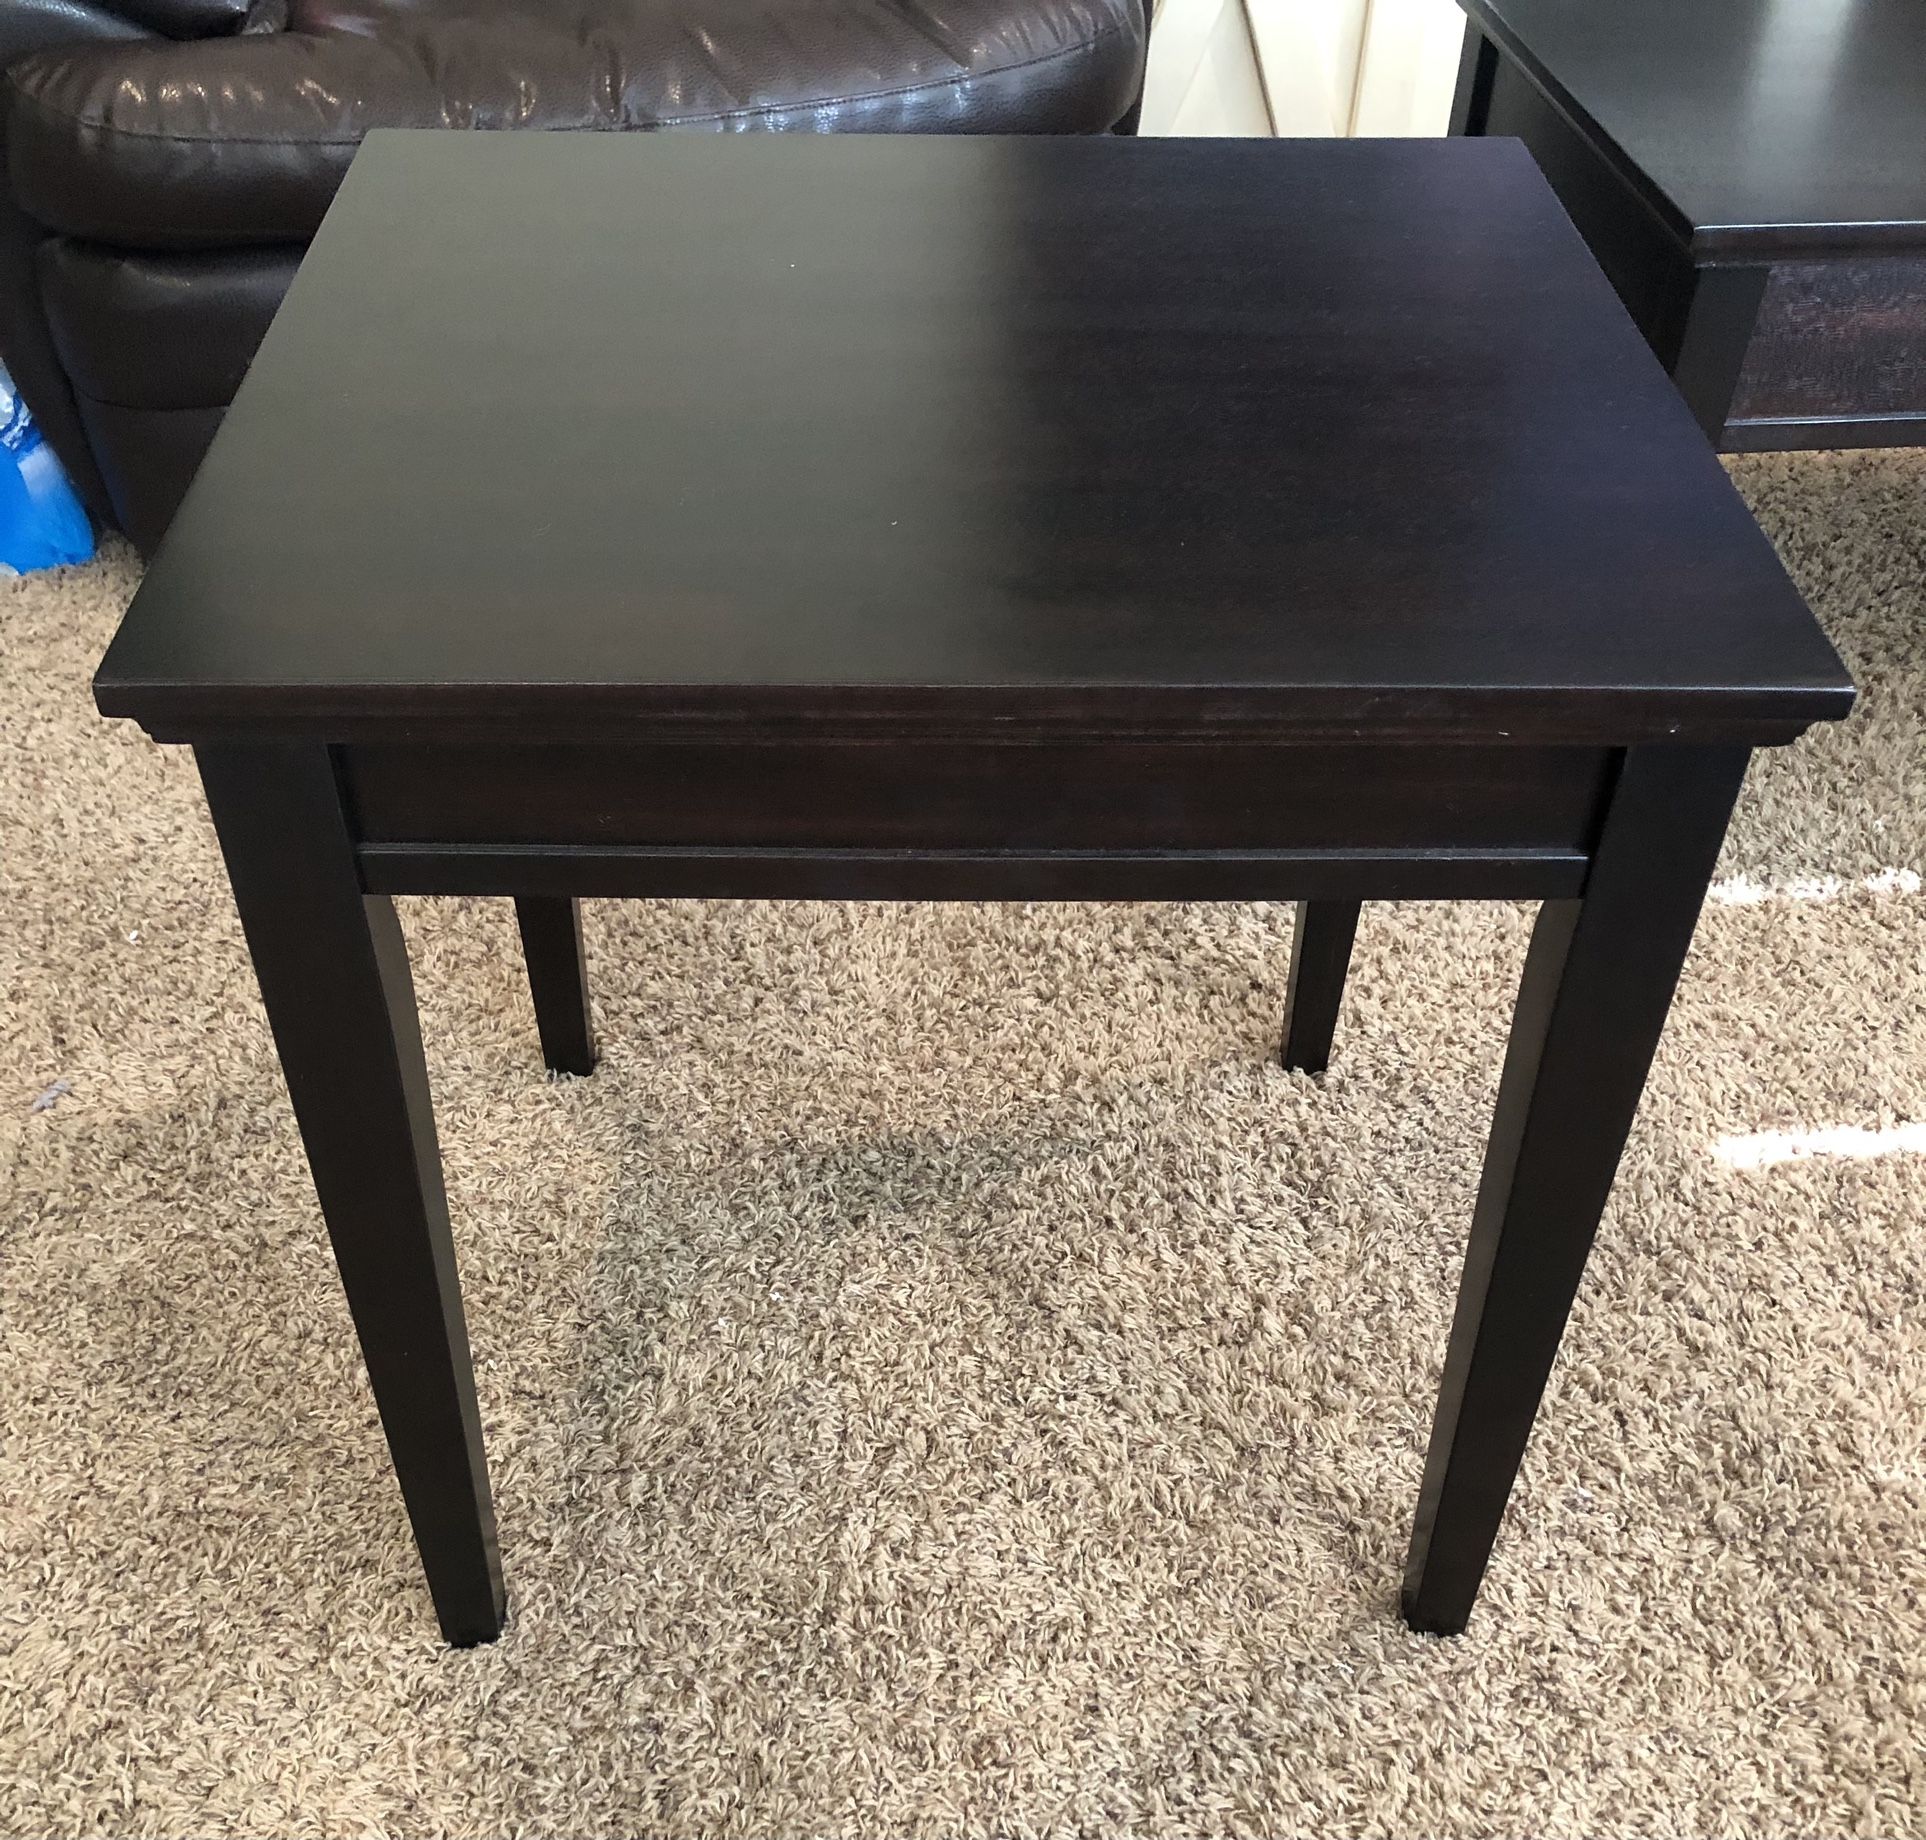 Brand New Coffee Table With Matching Side Tables